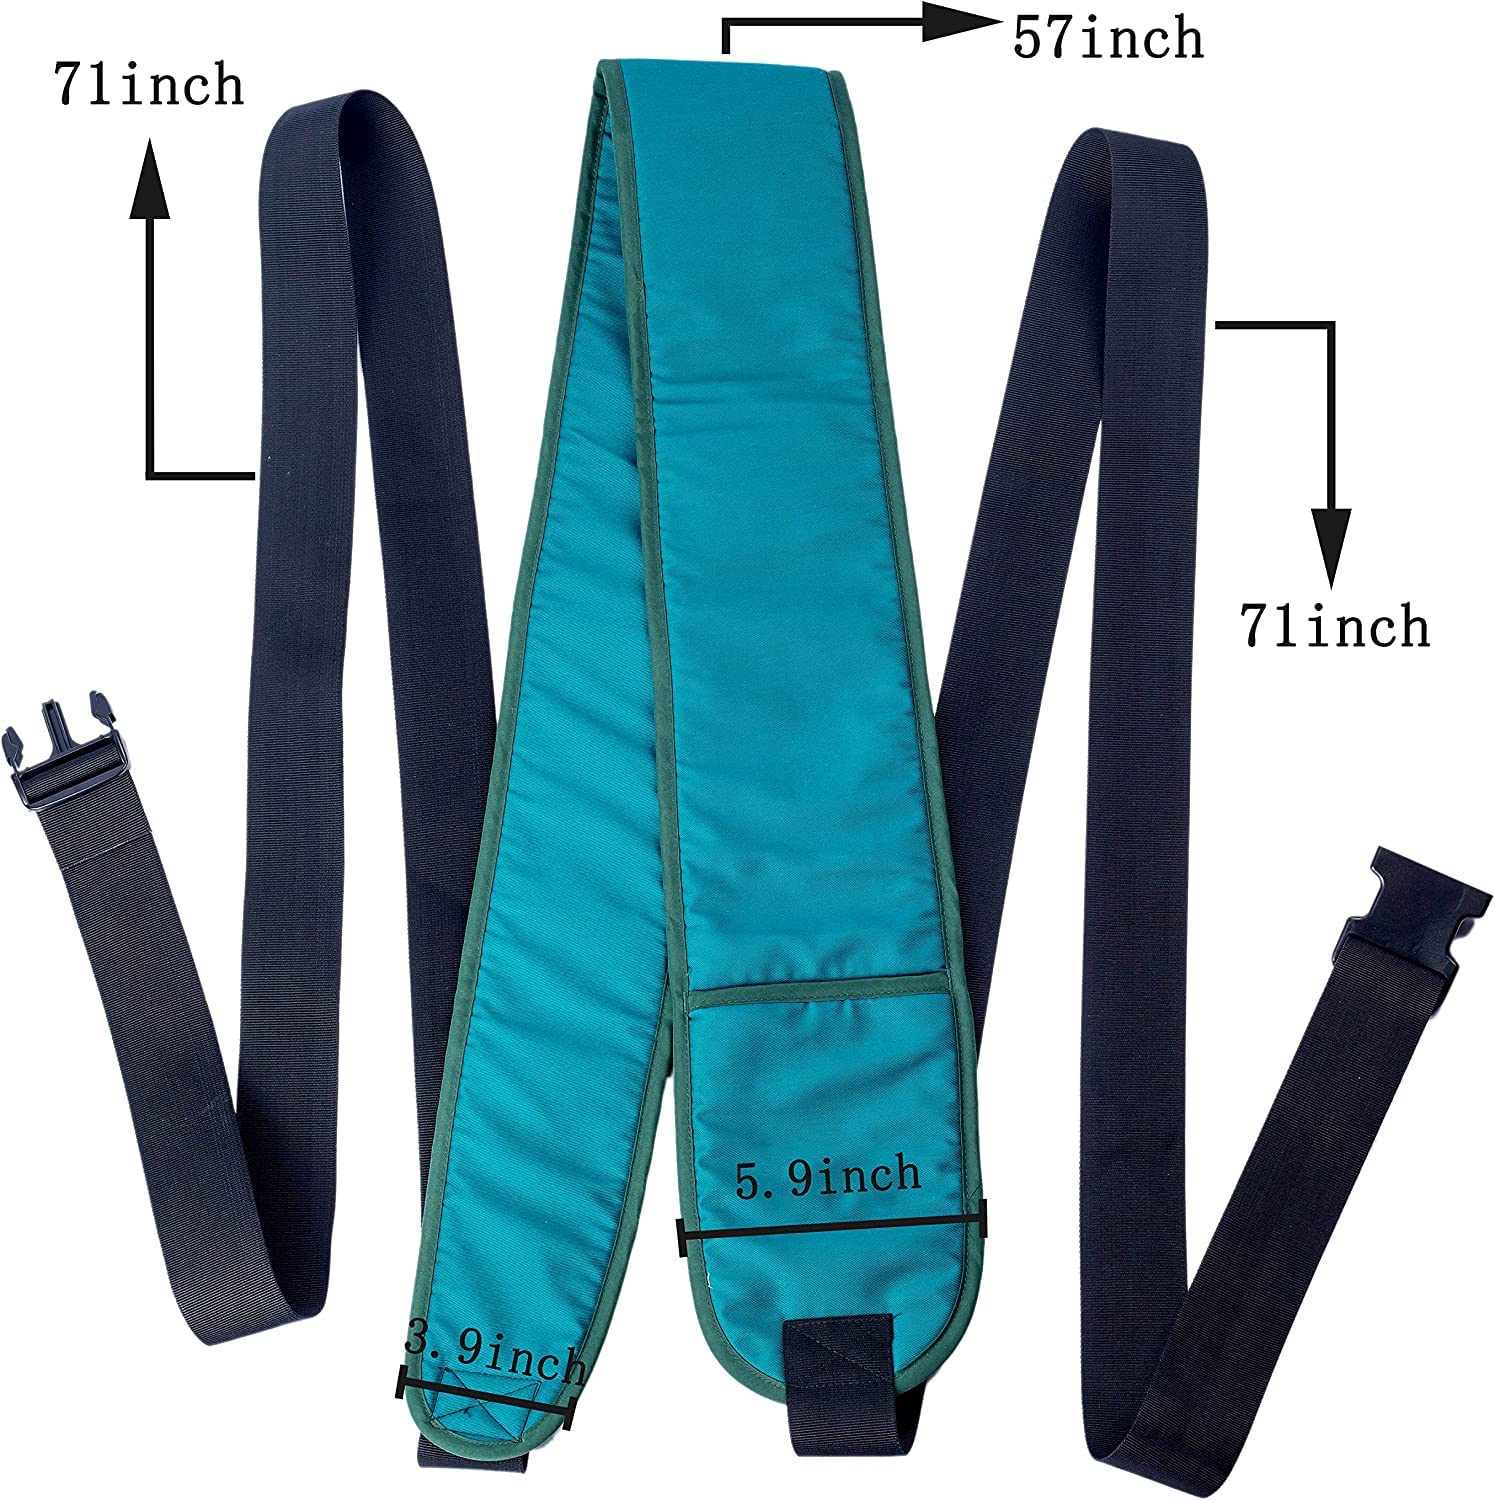 Medical Restraint-Bed Restraint Strap for Elderly Safety, Wheelchair Seat Belt, Chest Strap, Nursing Patient Anti-Bed Restraint, Safety System to Control Limbs for Post-Operative Patients